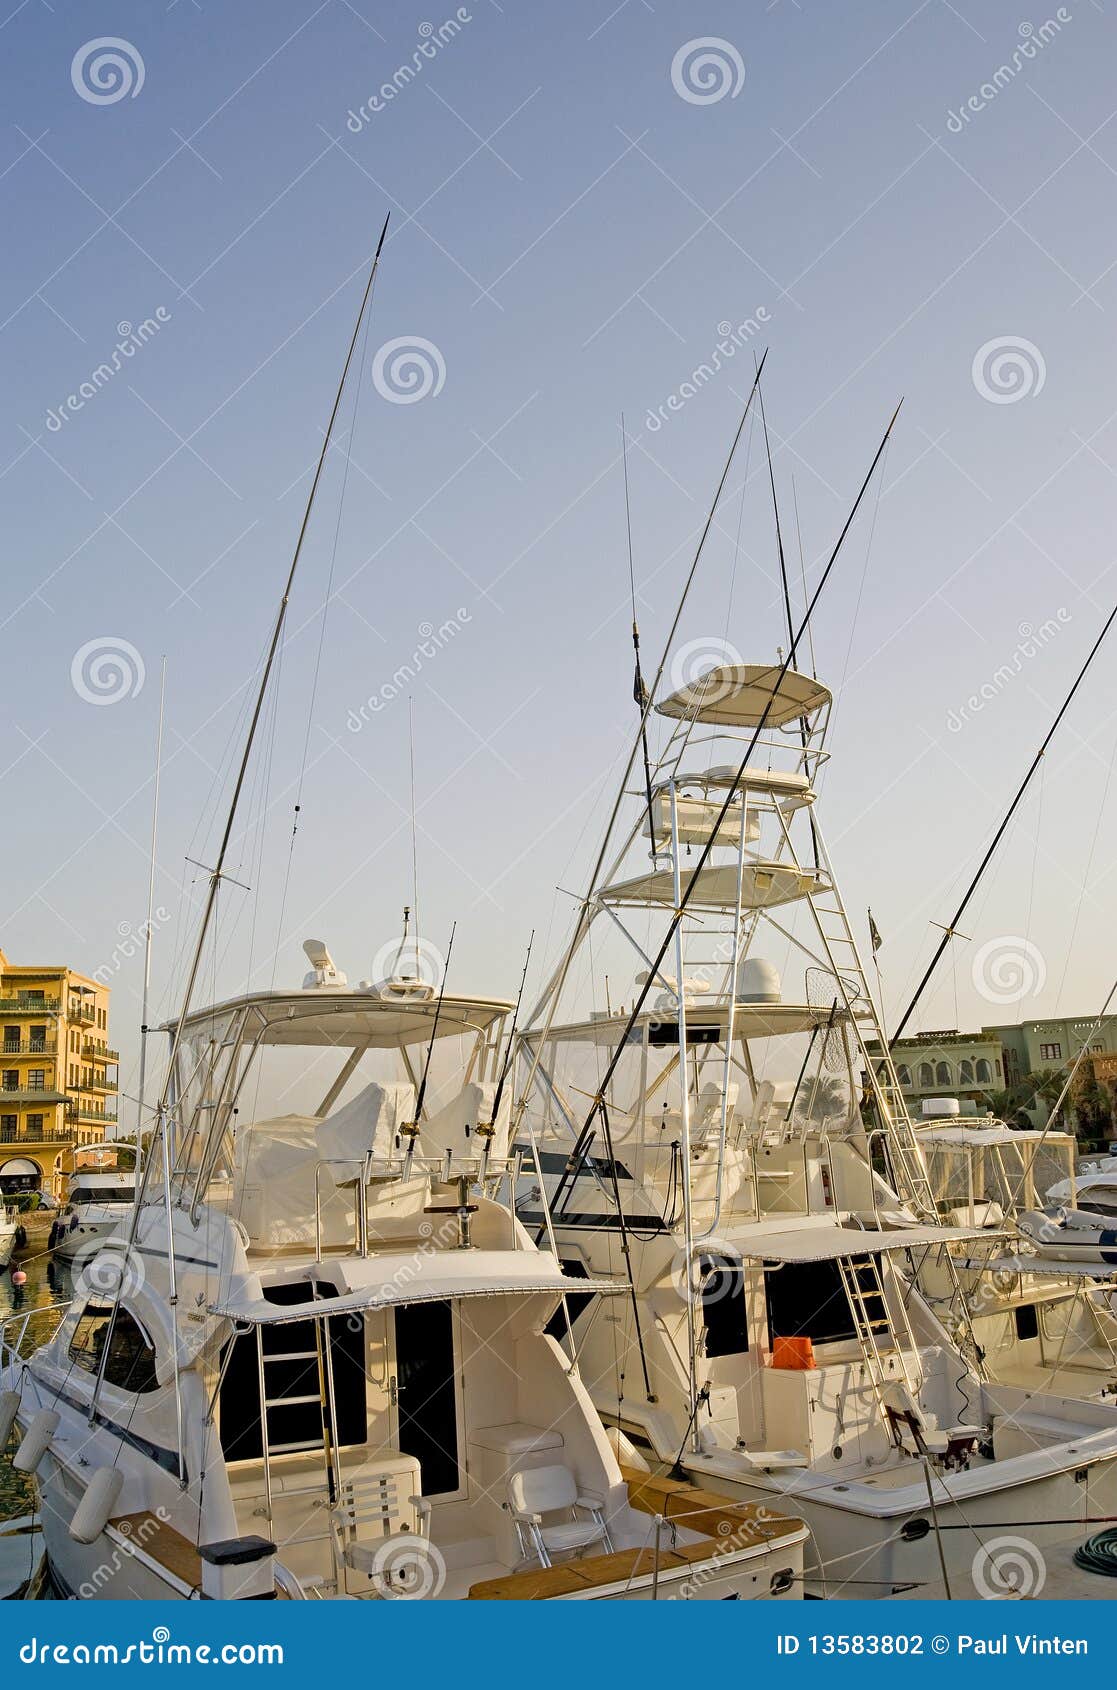 Sport Fishing Boats In A Marina Stock Photography - Image: 13583802